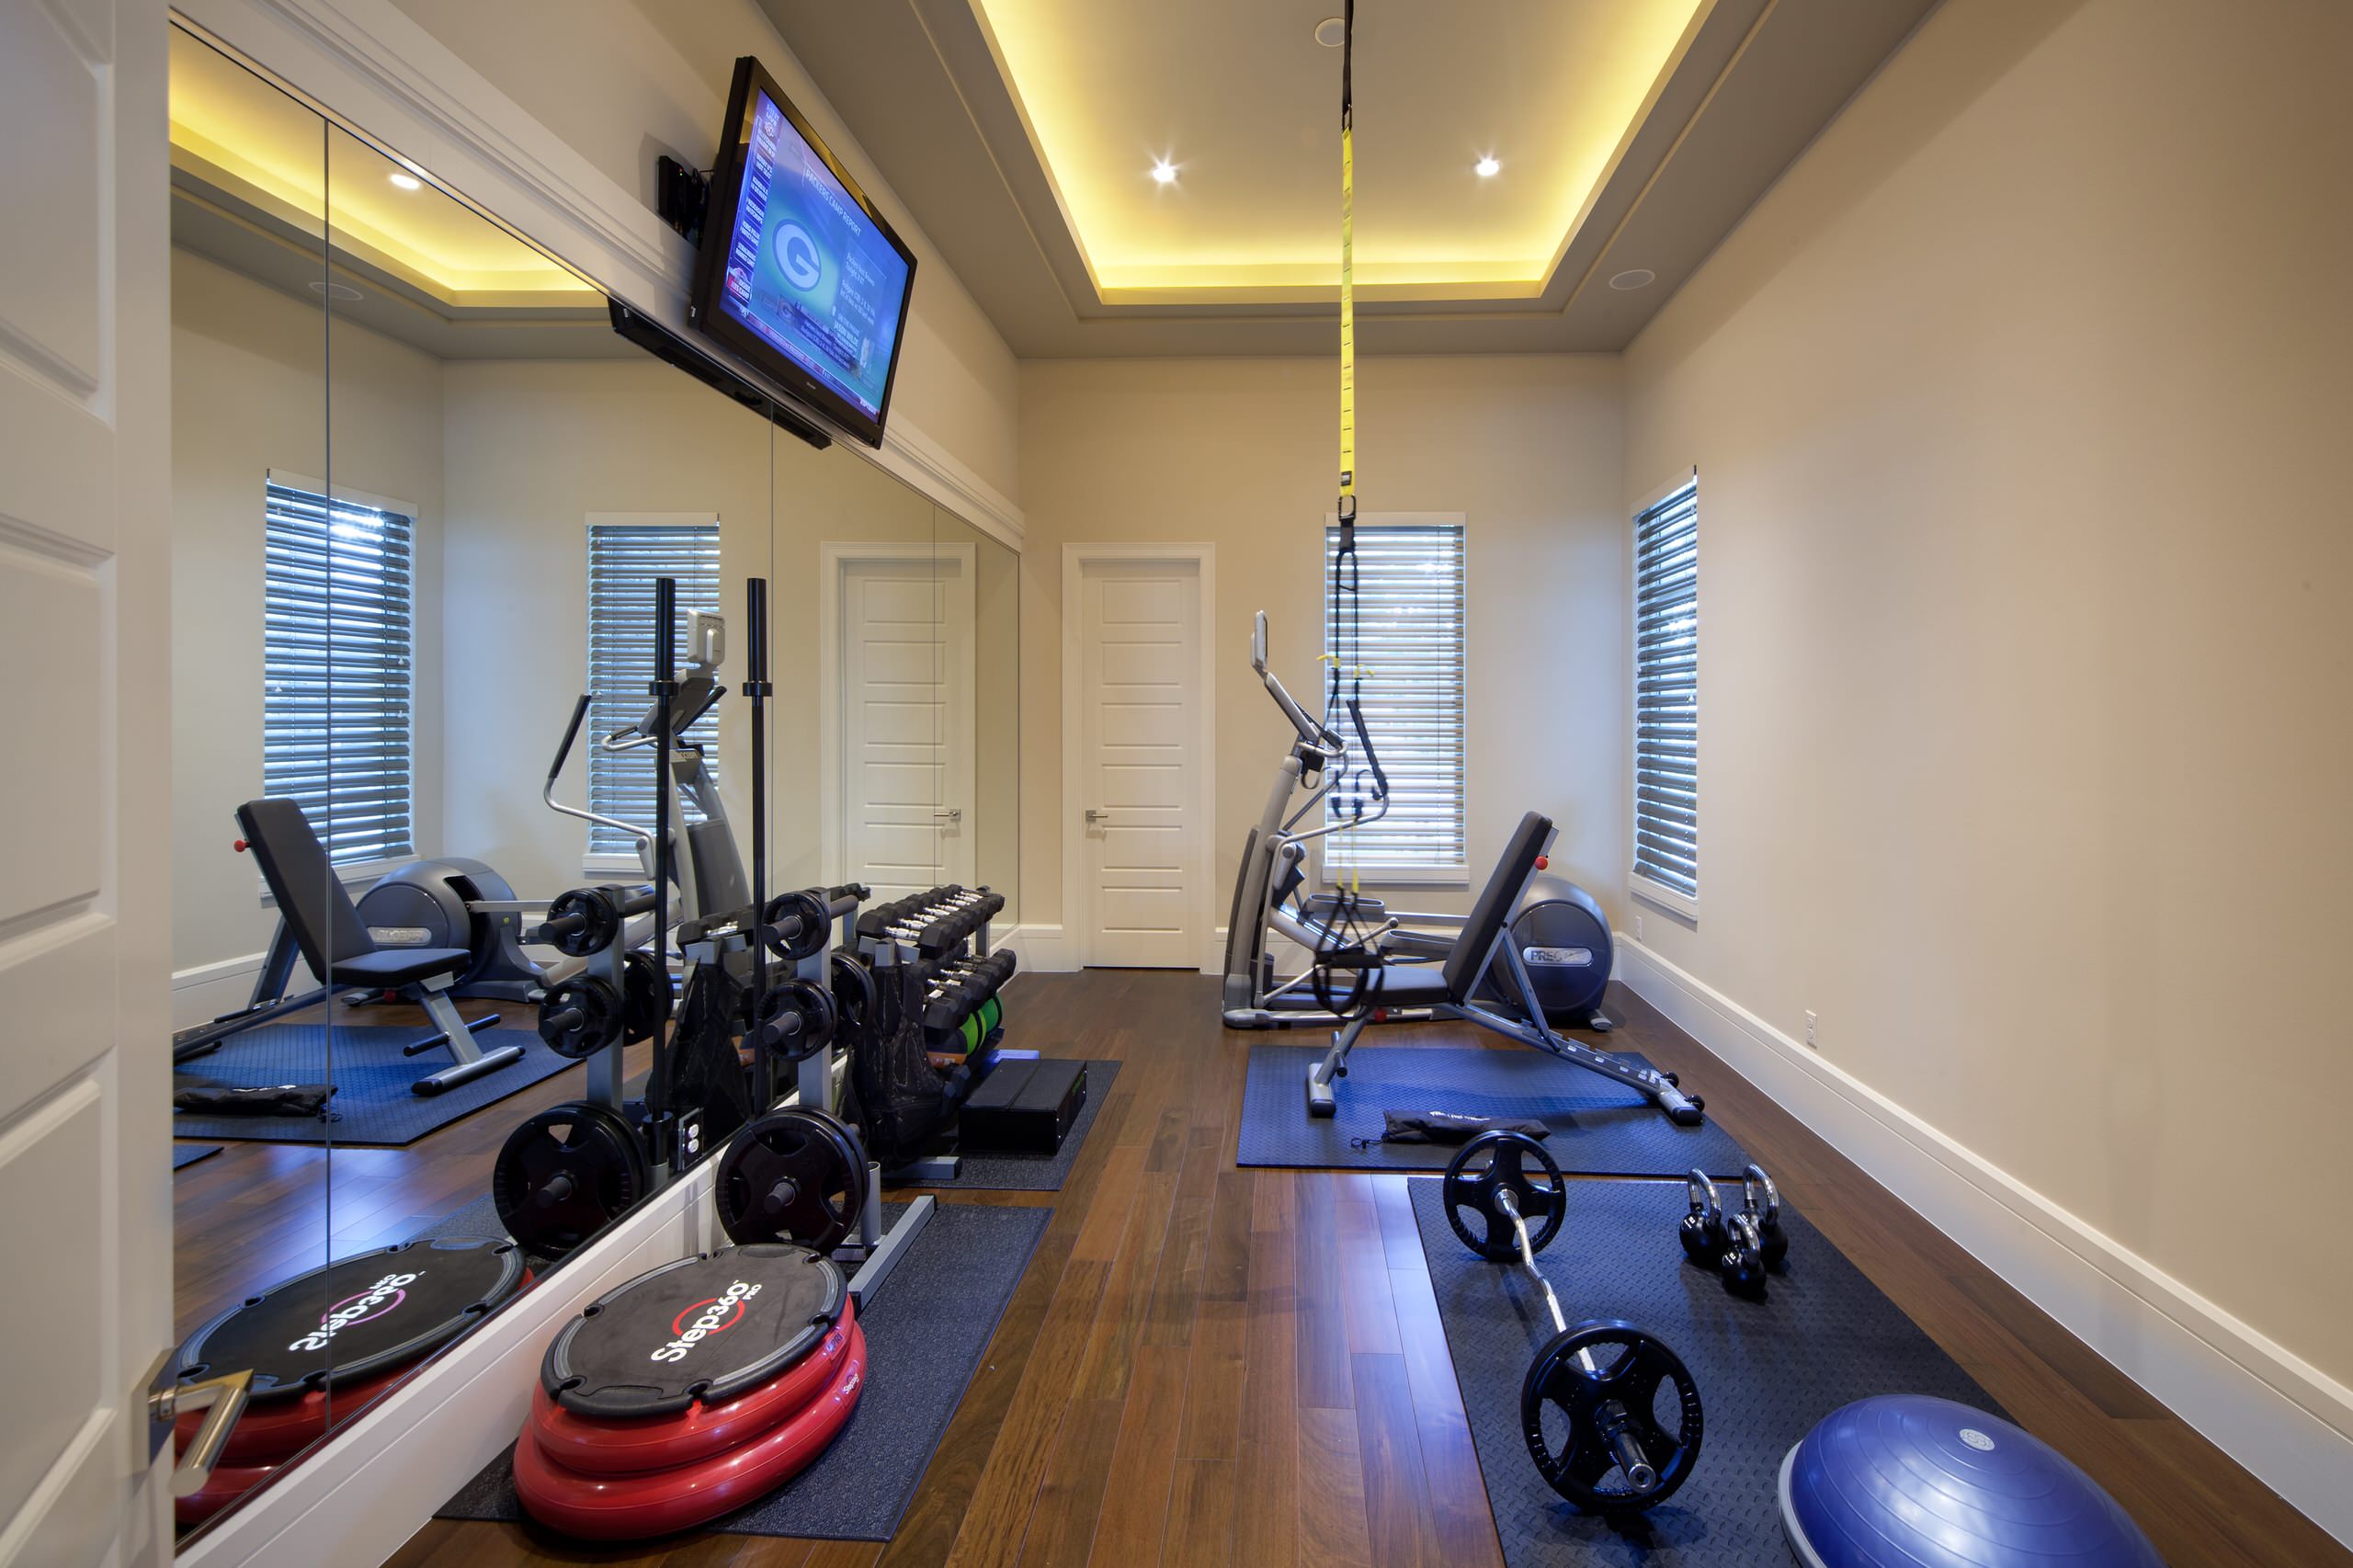 Gym Design Ideas, Pictures, Remodel and Decor